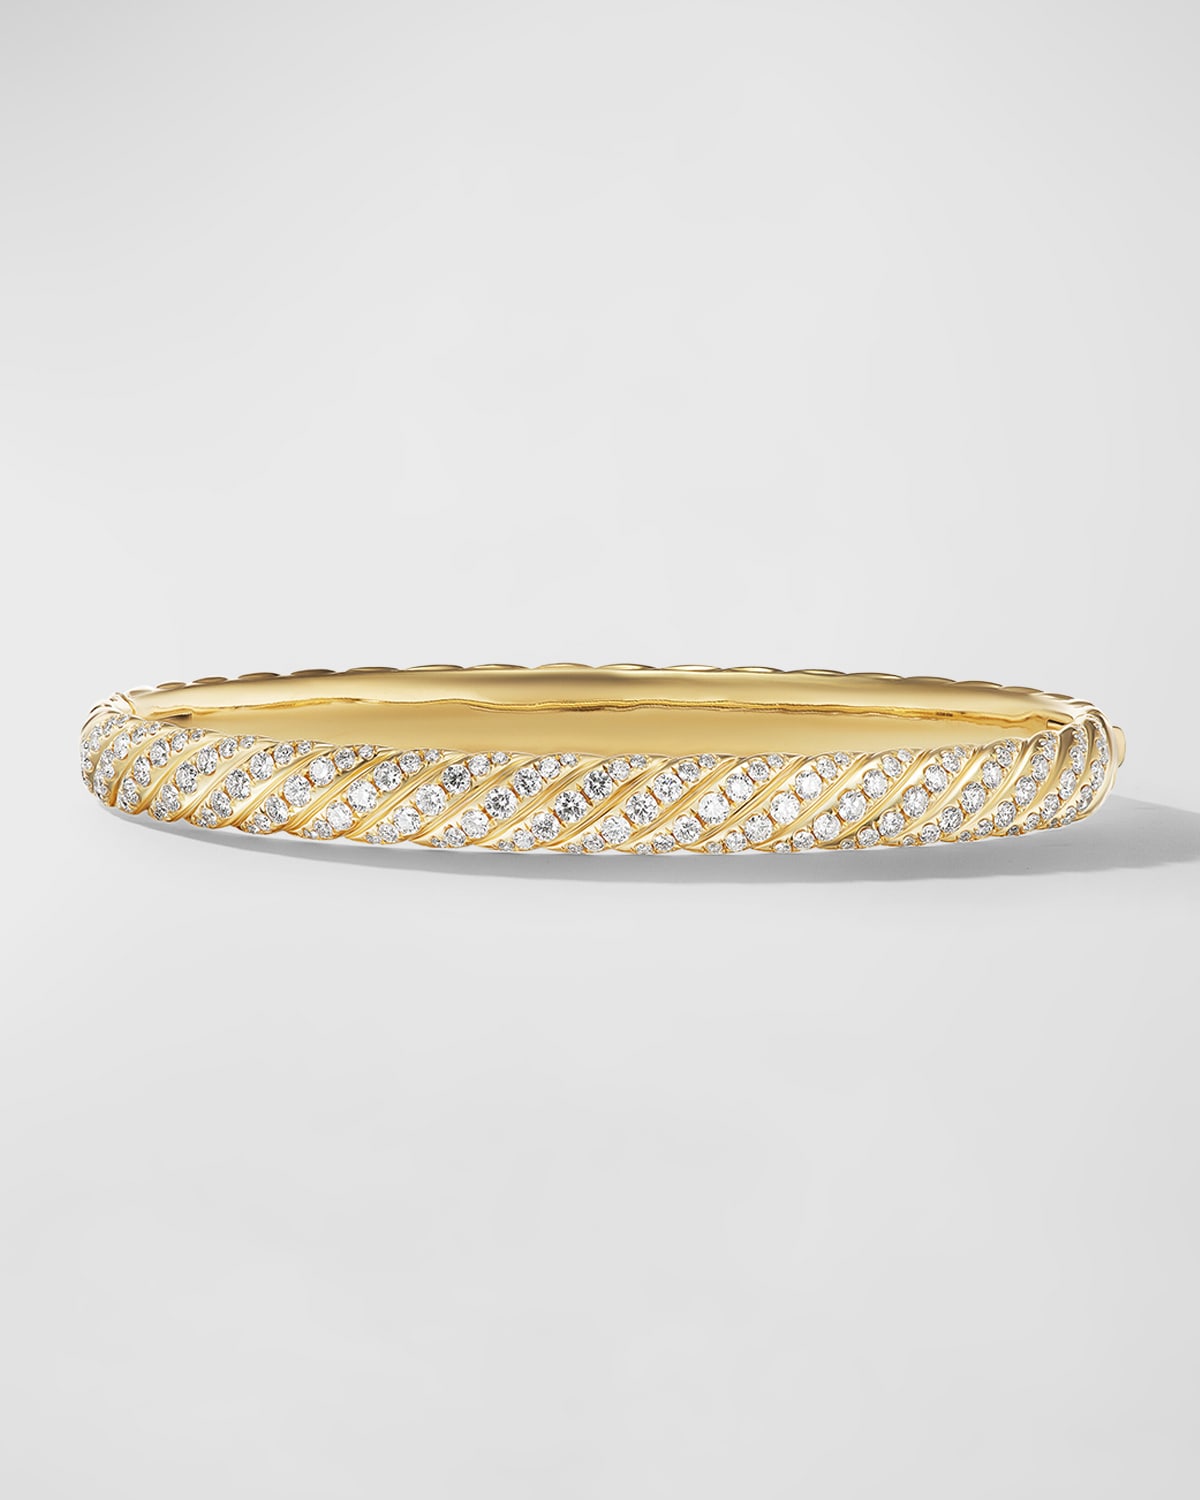 David Yurman Sculpted Cable Bracelet with Diamonds in 18K Gold, 6mm, Size M